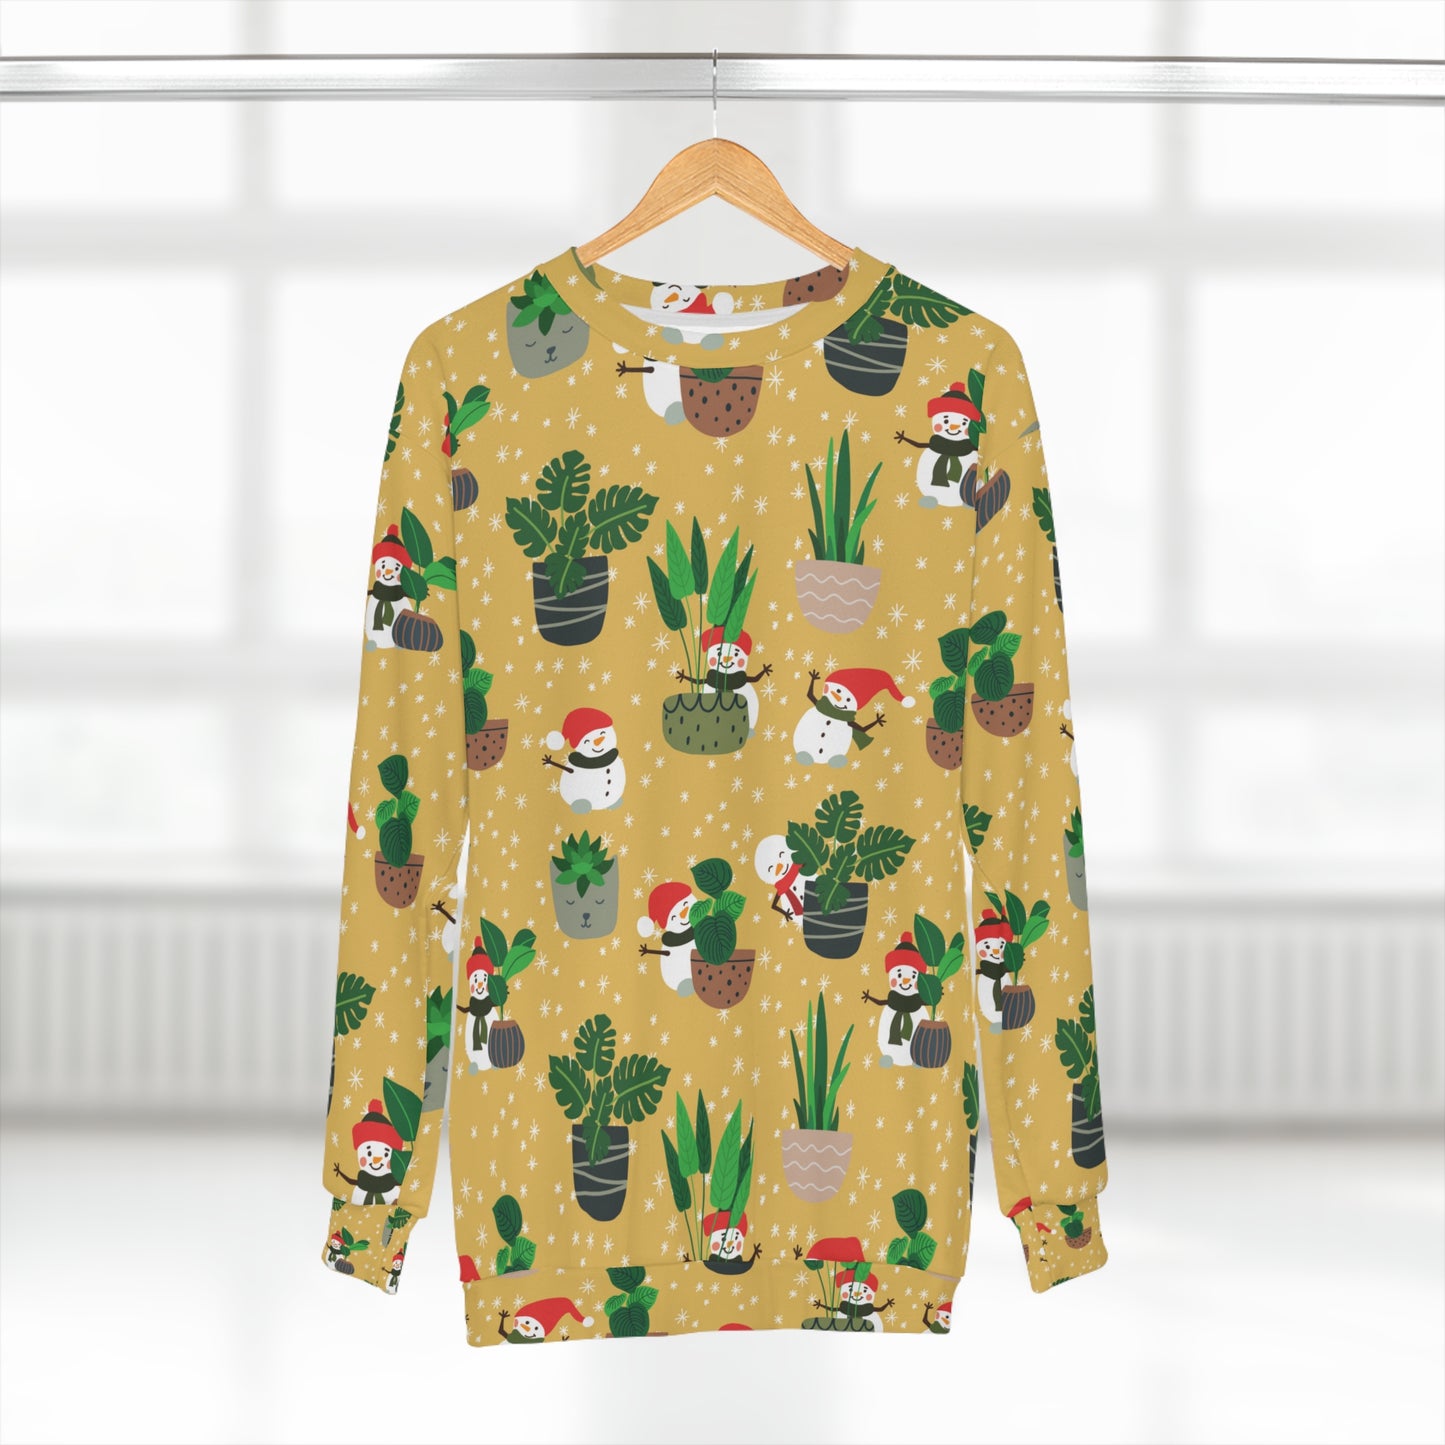 Snowman with house plants Unisex Sweatshirt for holiday season. Christmas ugly sweater for plant lover